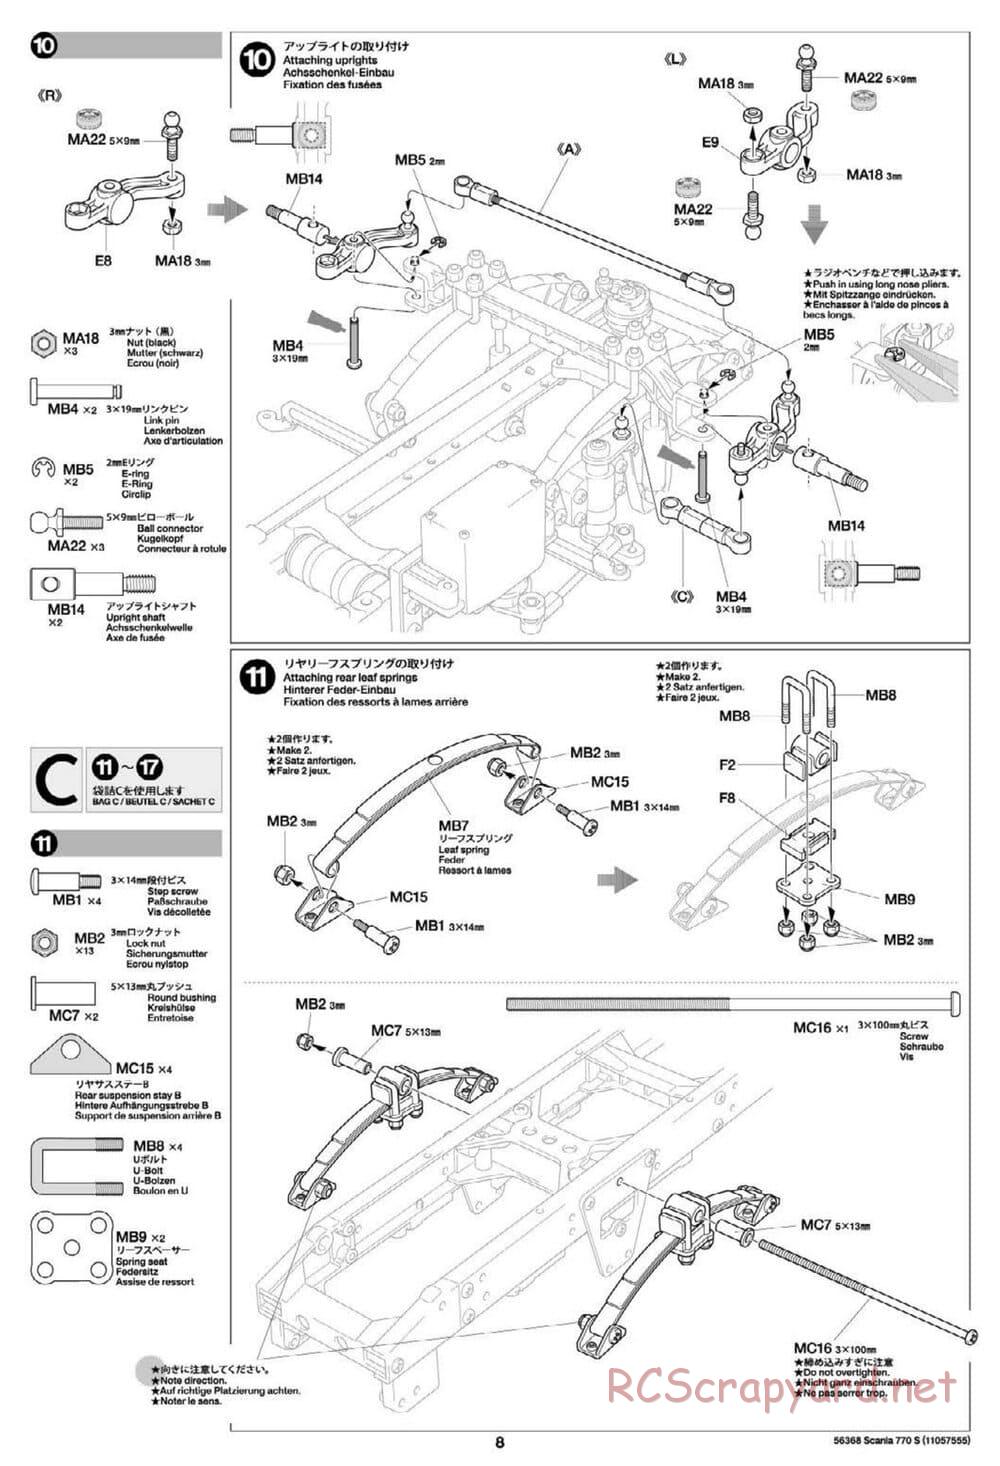 Tamiya - Scania 770S 6x4 Tractor Truck Chassis - Manual - Page 8